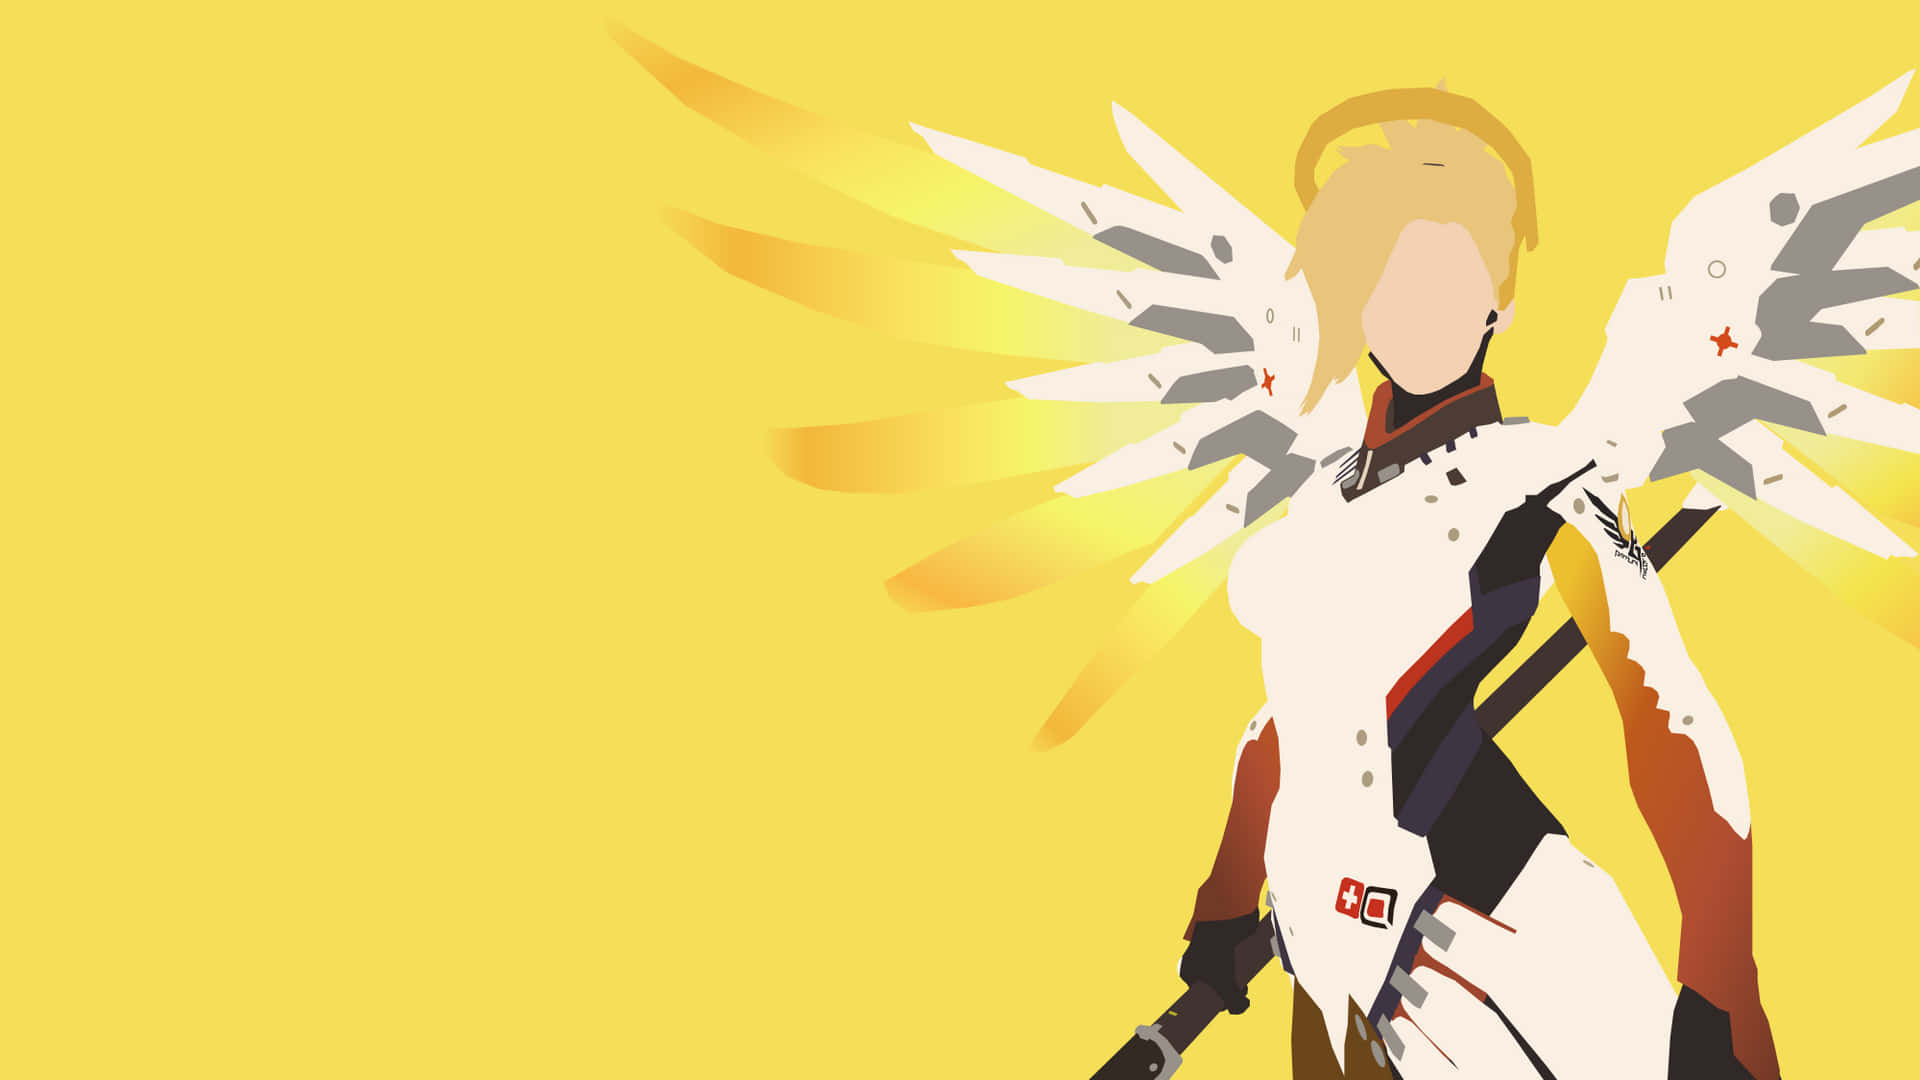 Overwatch Minimalist: An Epic Video Game Comes to Life Wallpaper